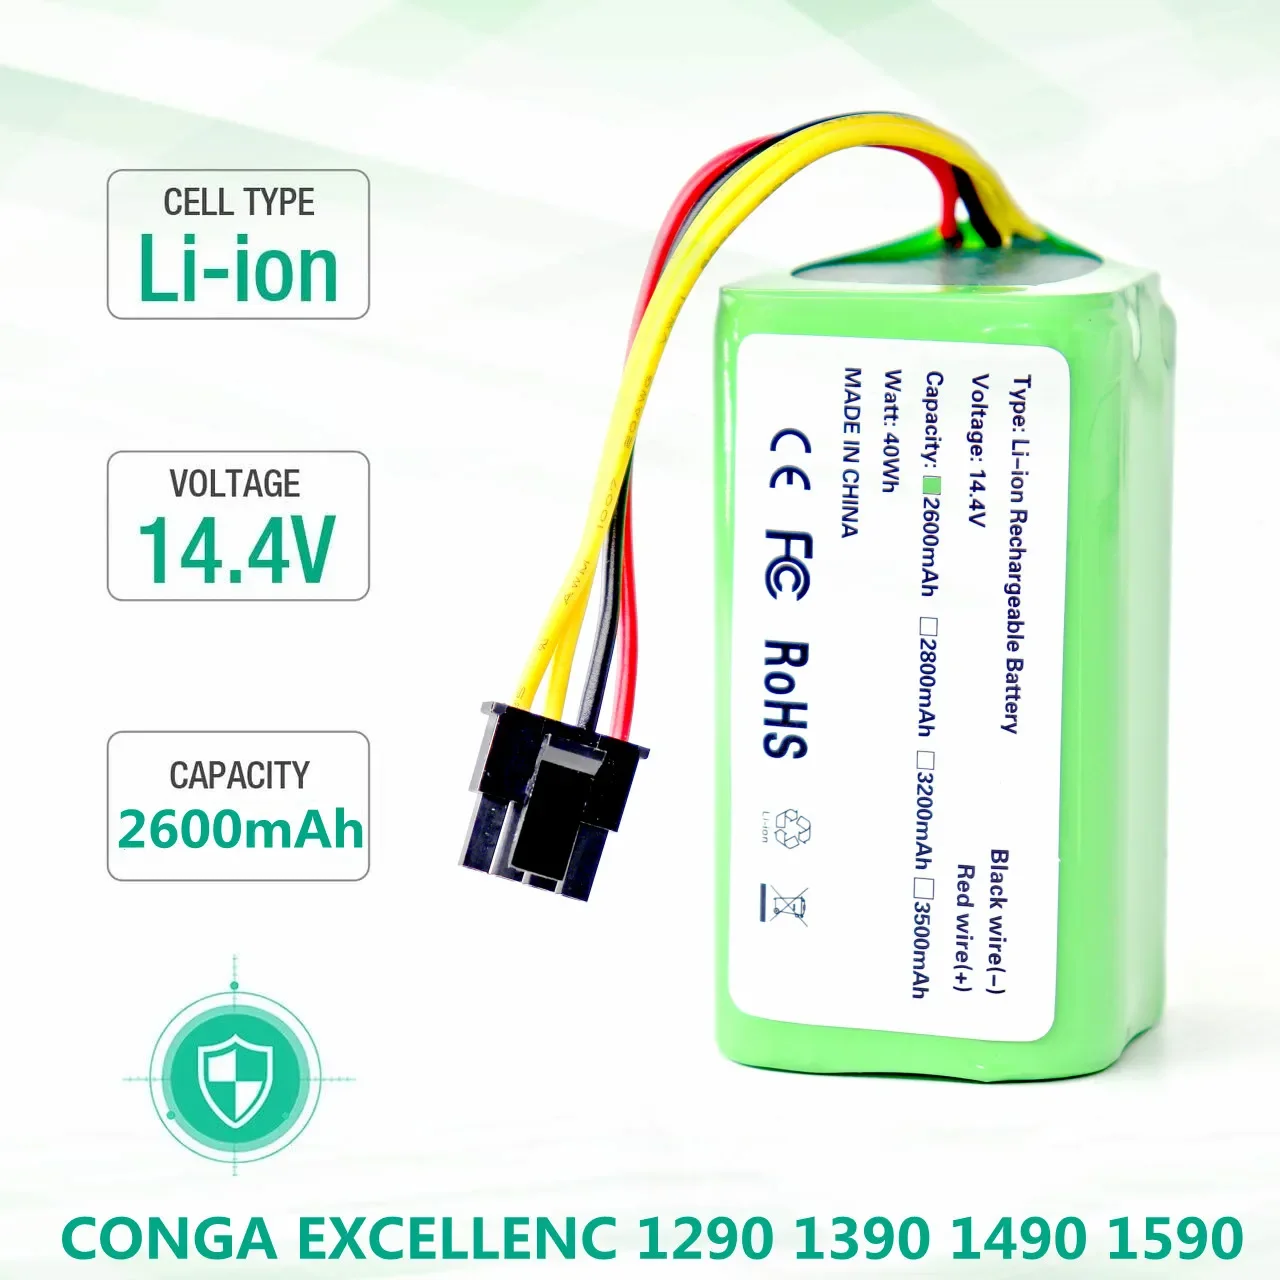 

18650 14.4V 2600nAh Li-Ion Battery for Cecotec Conga 1290 1390 1490 1590 Vacuum Cleaner Genio deluxe 370 gutrend echo 520